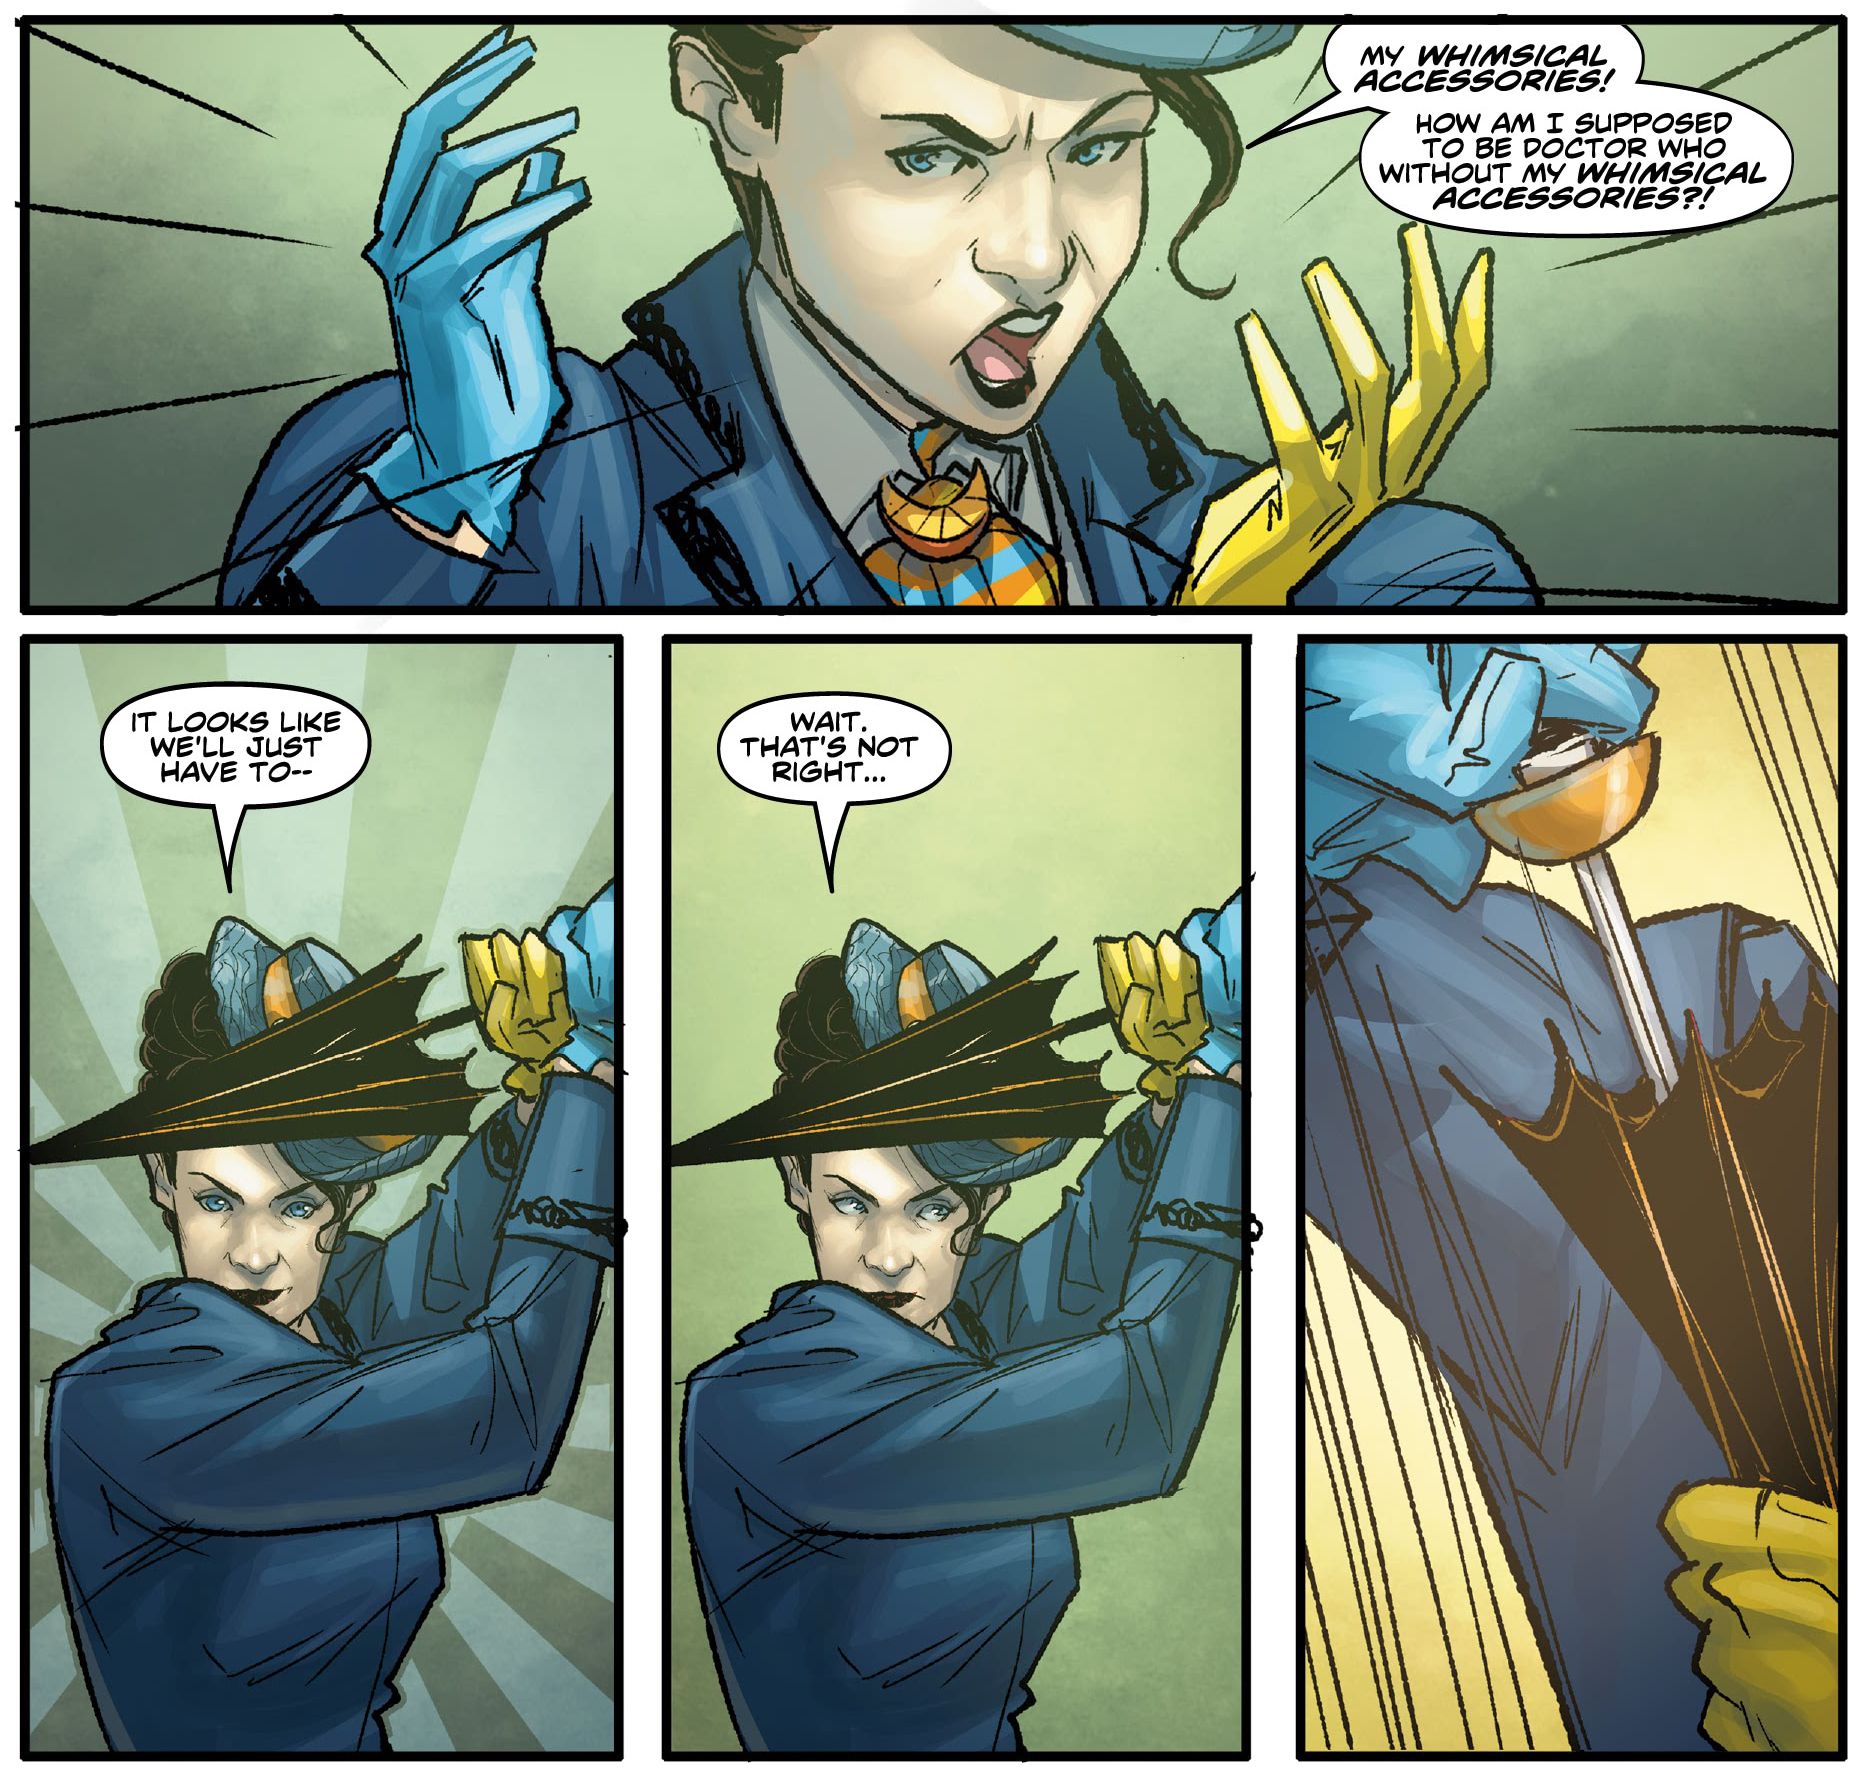 Missy pulls a sword out of her umbrella to fight the master